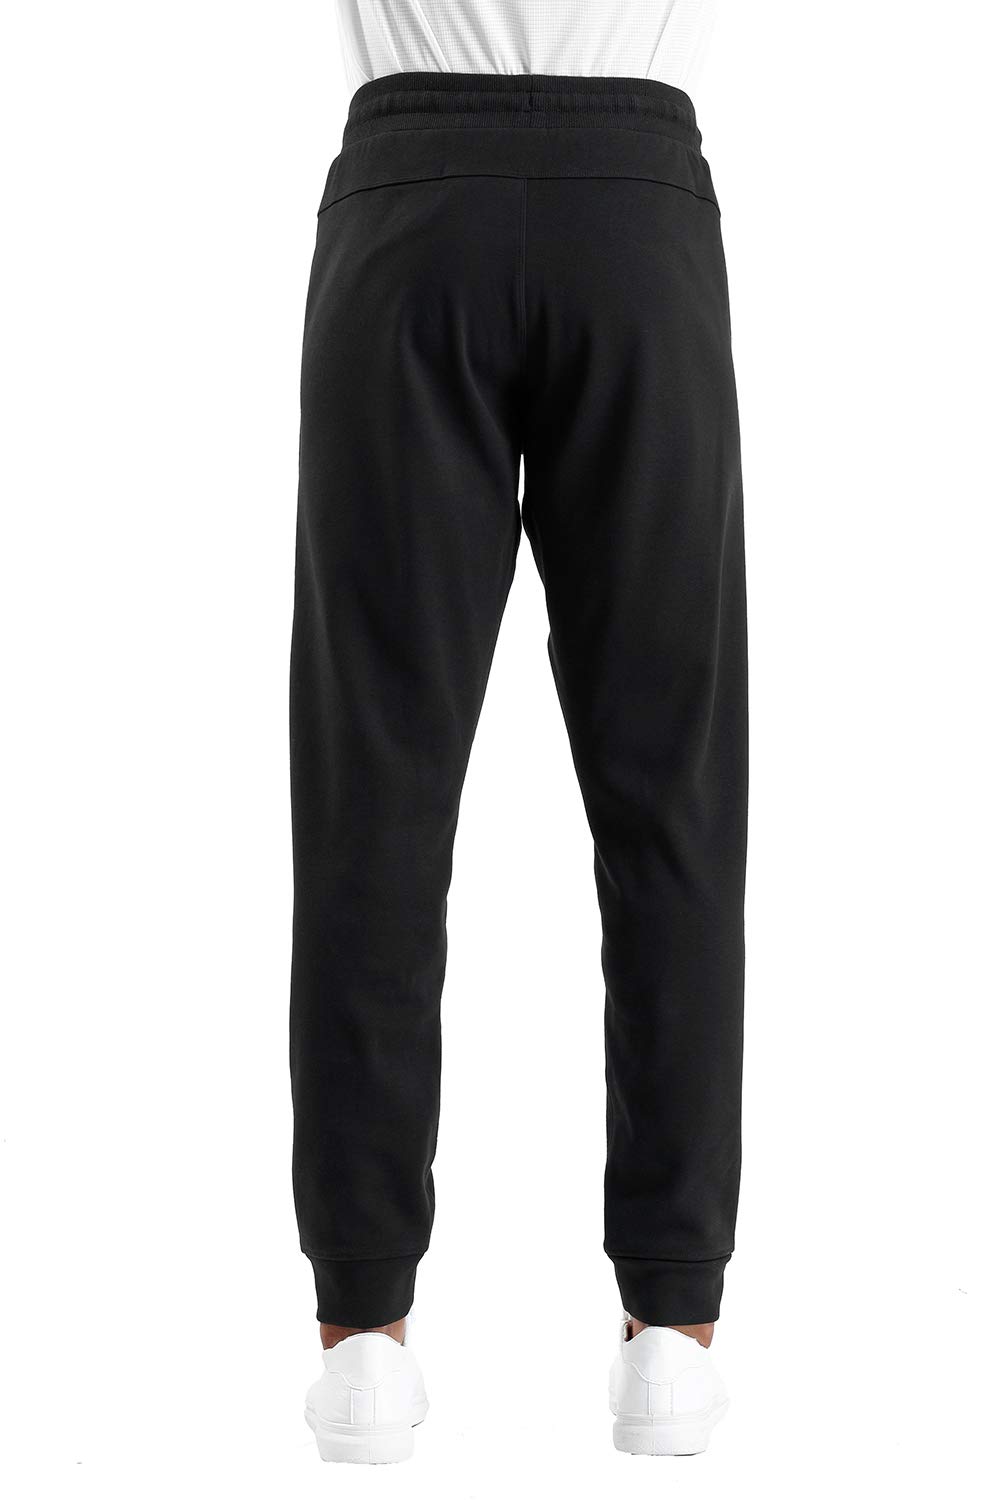 THE GYM PEOPLE Mens' Fleece Joggers Pants with Deep Pockets in Loose-fit Style